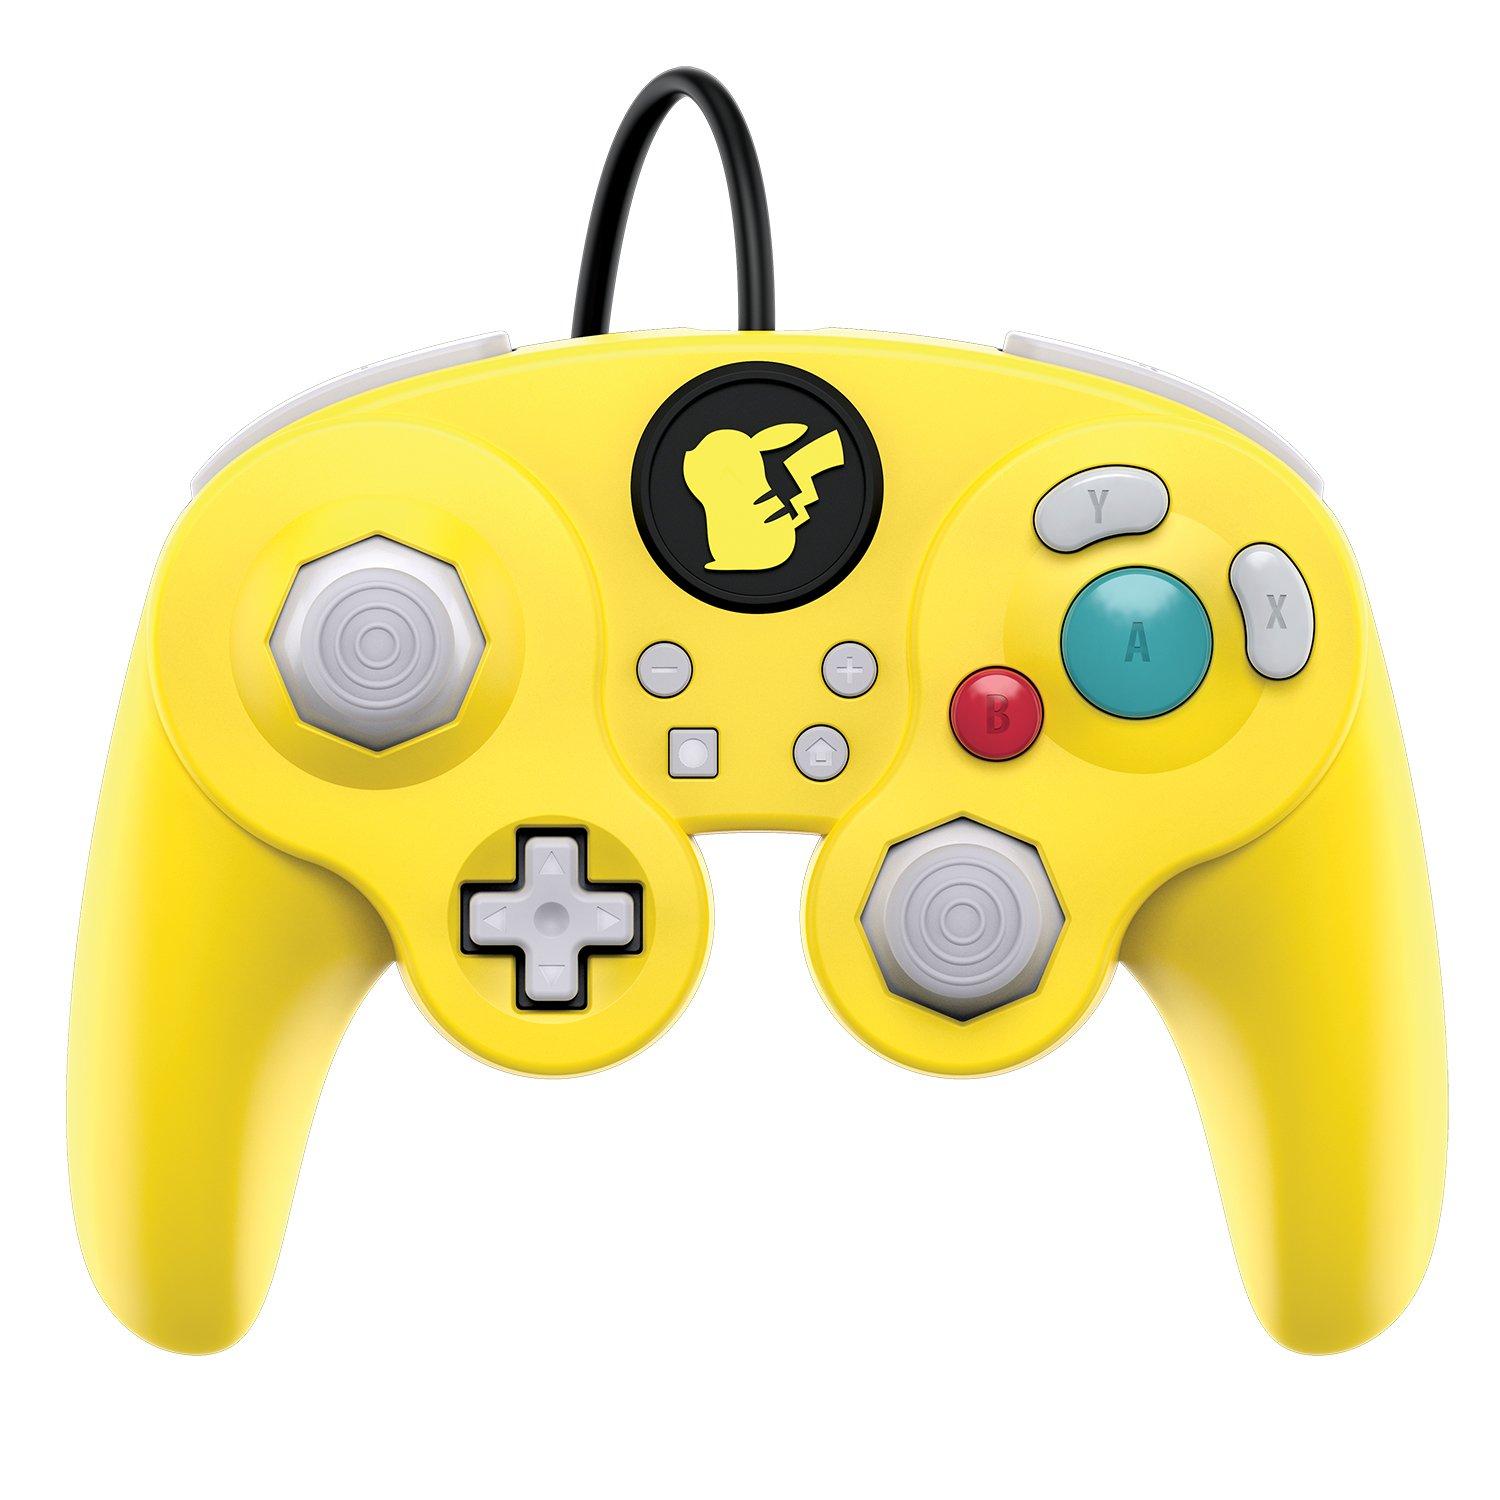 Super Smash Bros Ultimate Pikachu Edition Wired Fight Pad Pro Controller For Nintendo Switch Nintendo Switch Gamestop